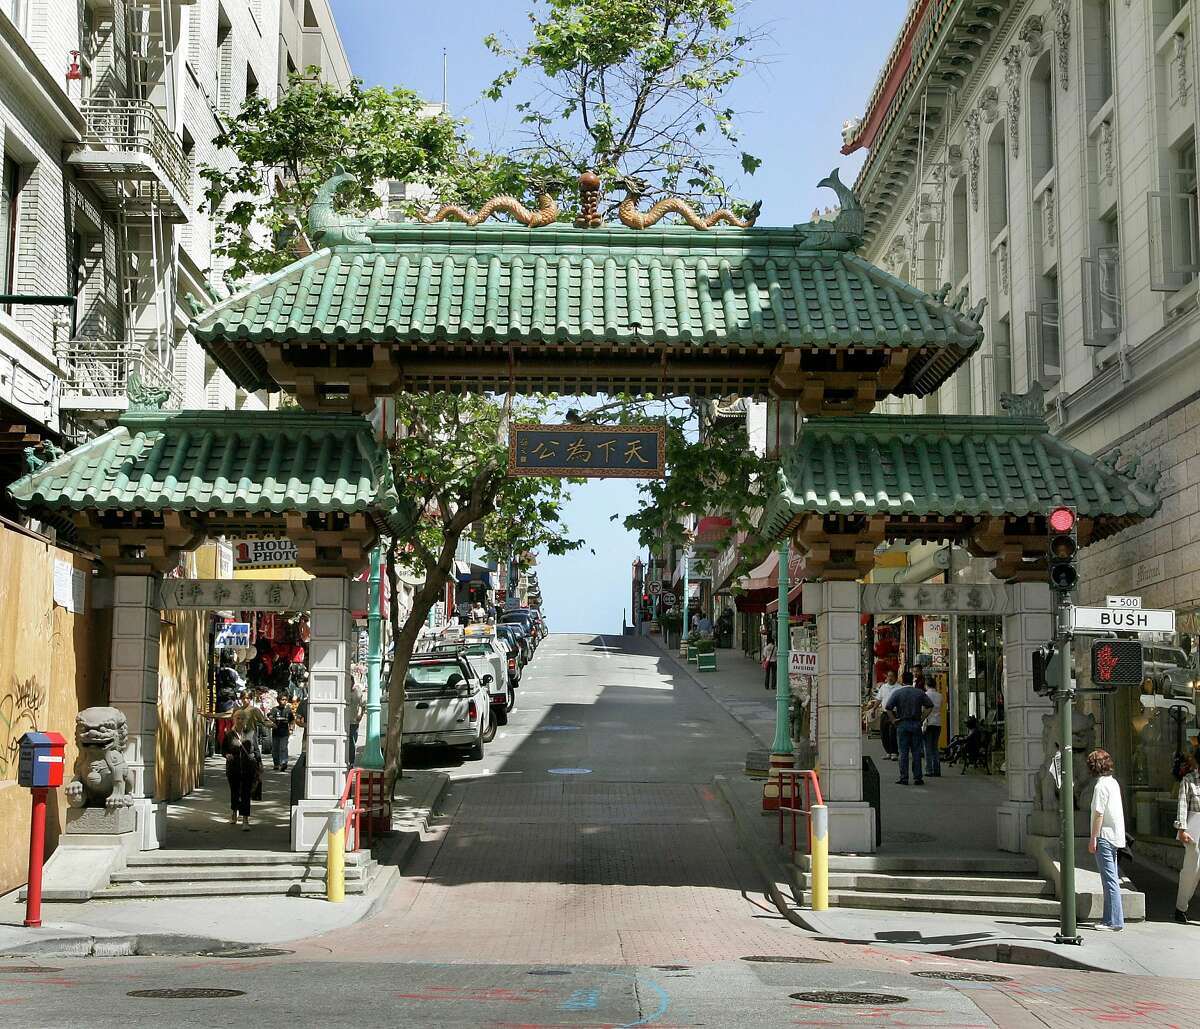 Shame of the city When Chinese sex slaves were trafficked in SF photo